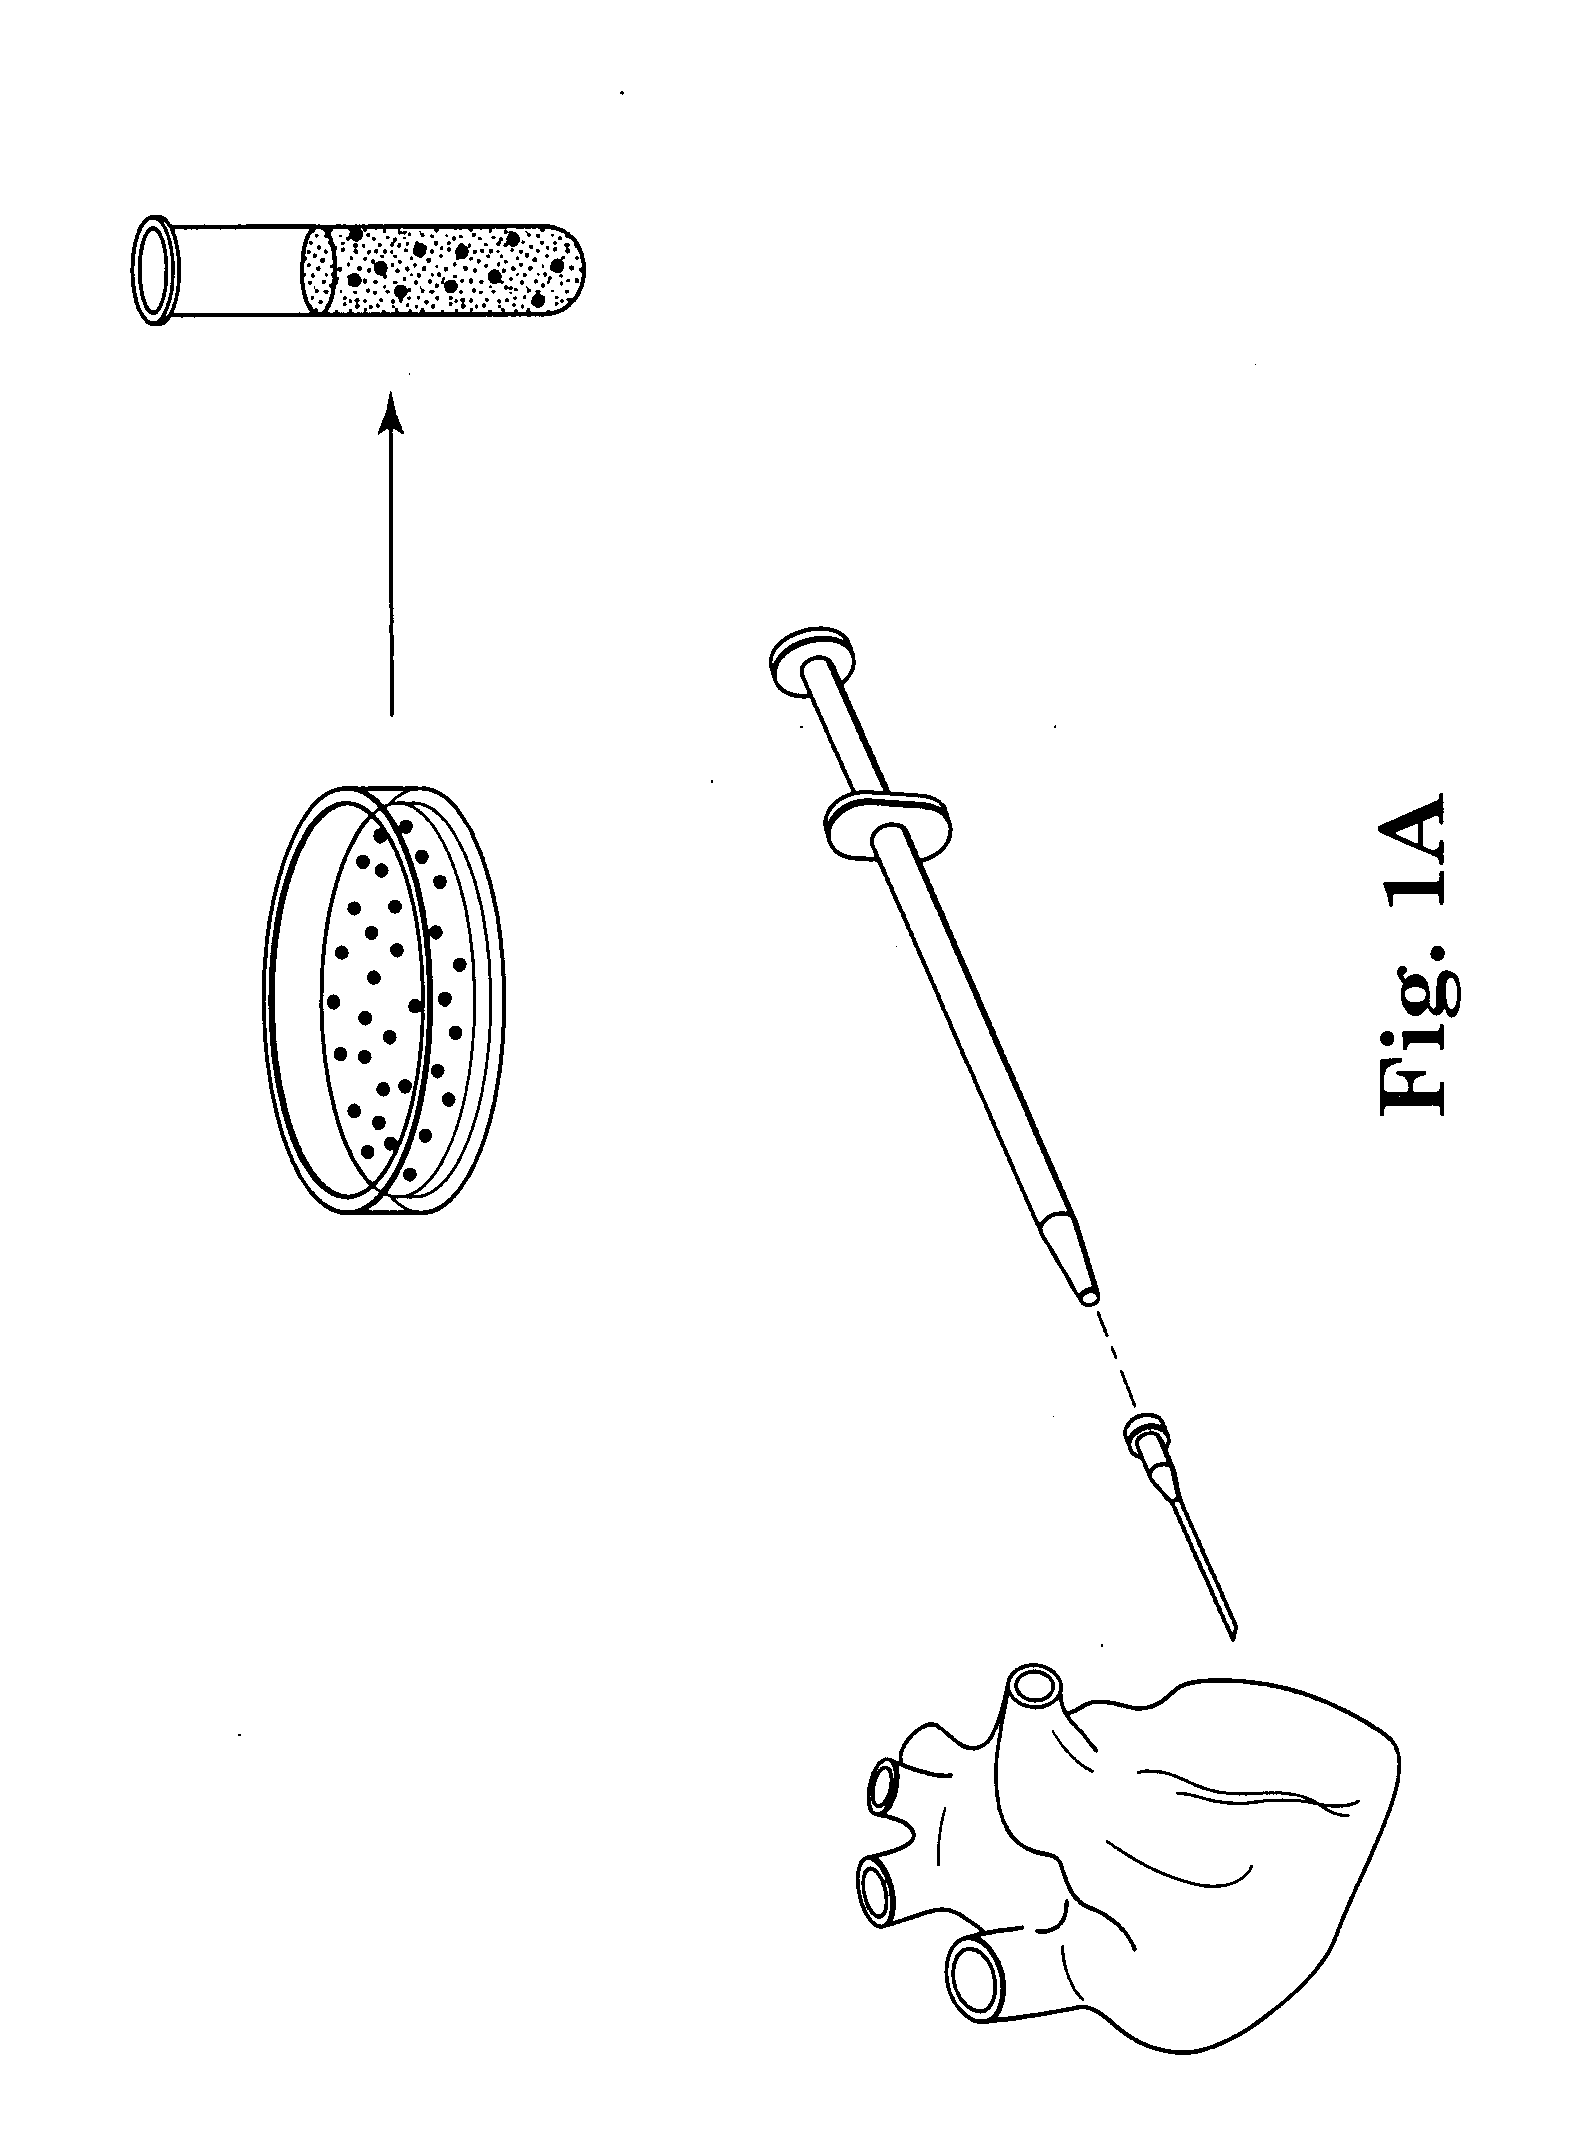 Methods and apparatus for using polymer-based beads and hydrogels for cardiac applications